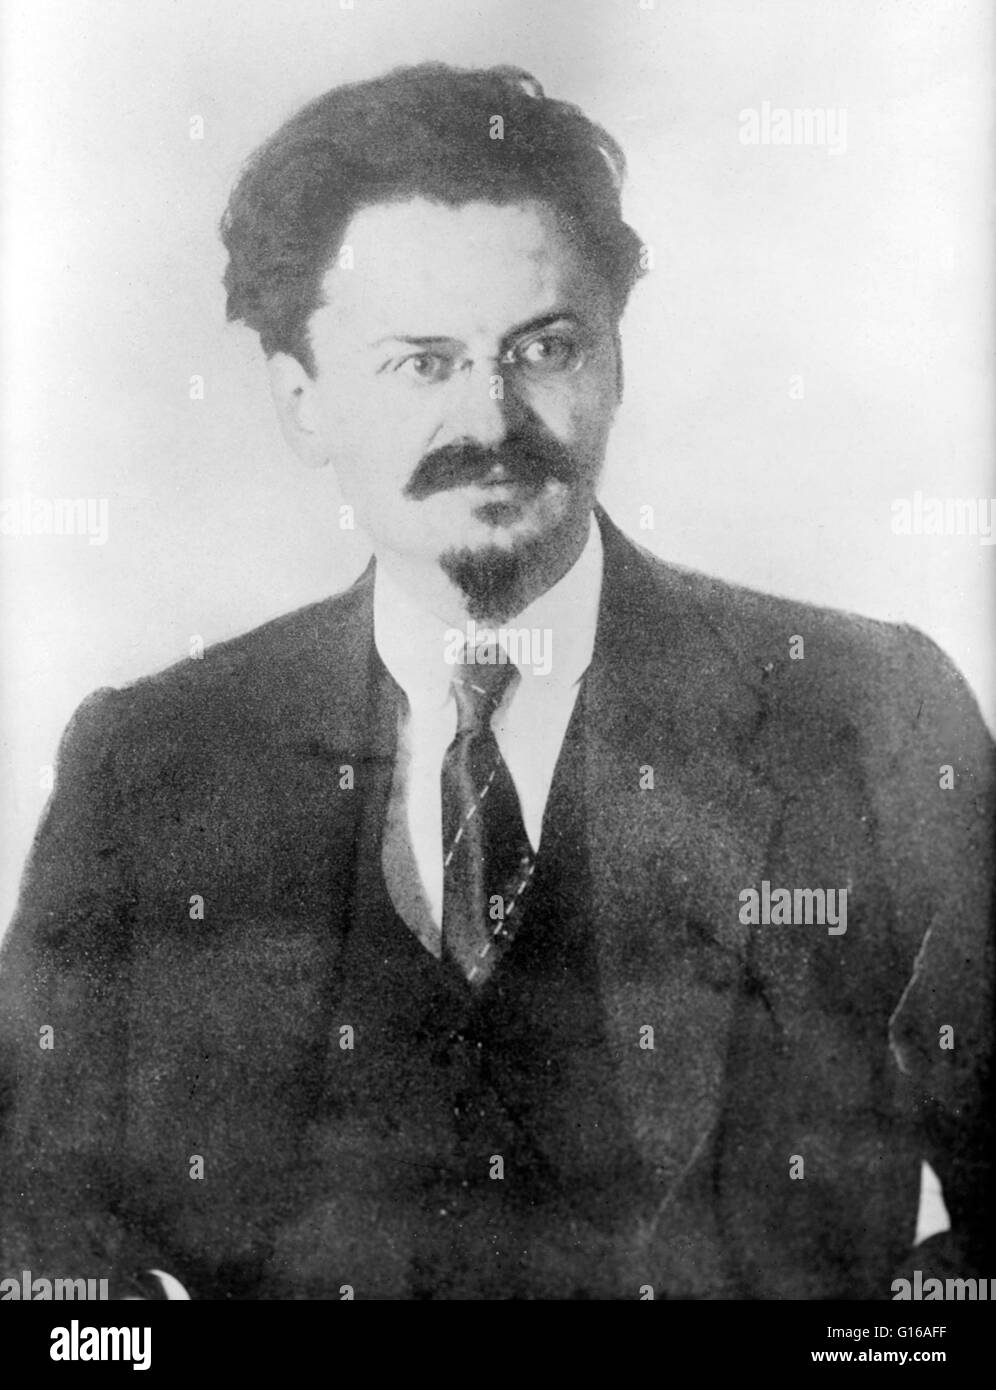 Bain News Service photograph of Trotsky. No date recorded on caption card. Leon Trotsky (November 7, 1879 - August 21, 1940) was a Russian Marxist revolutionary and theorist. He joined the Bolsheviks prior to the 1917 October Revolution and was a major fi Stock Photo